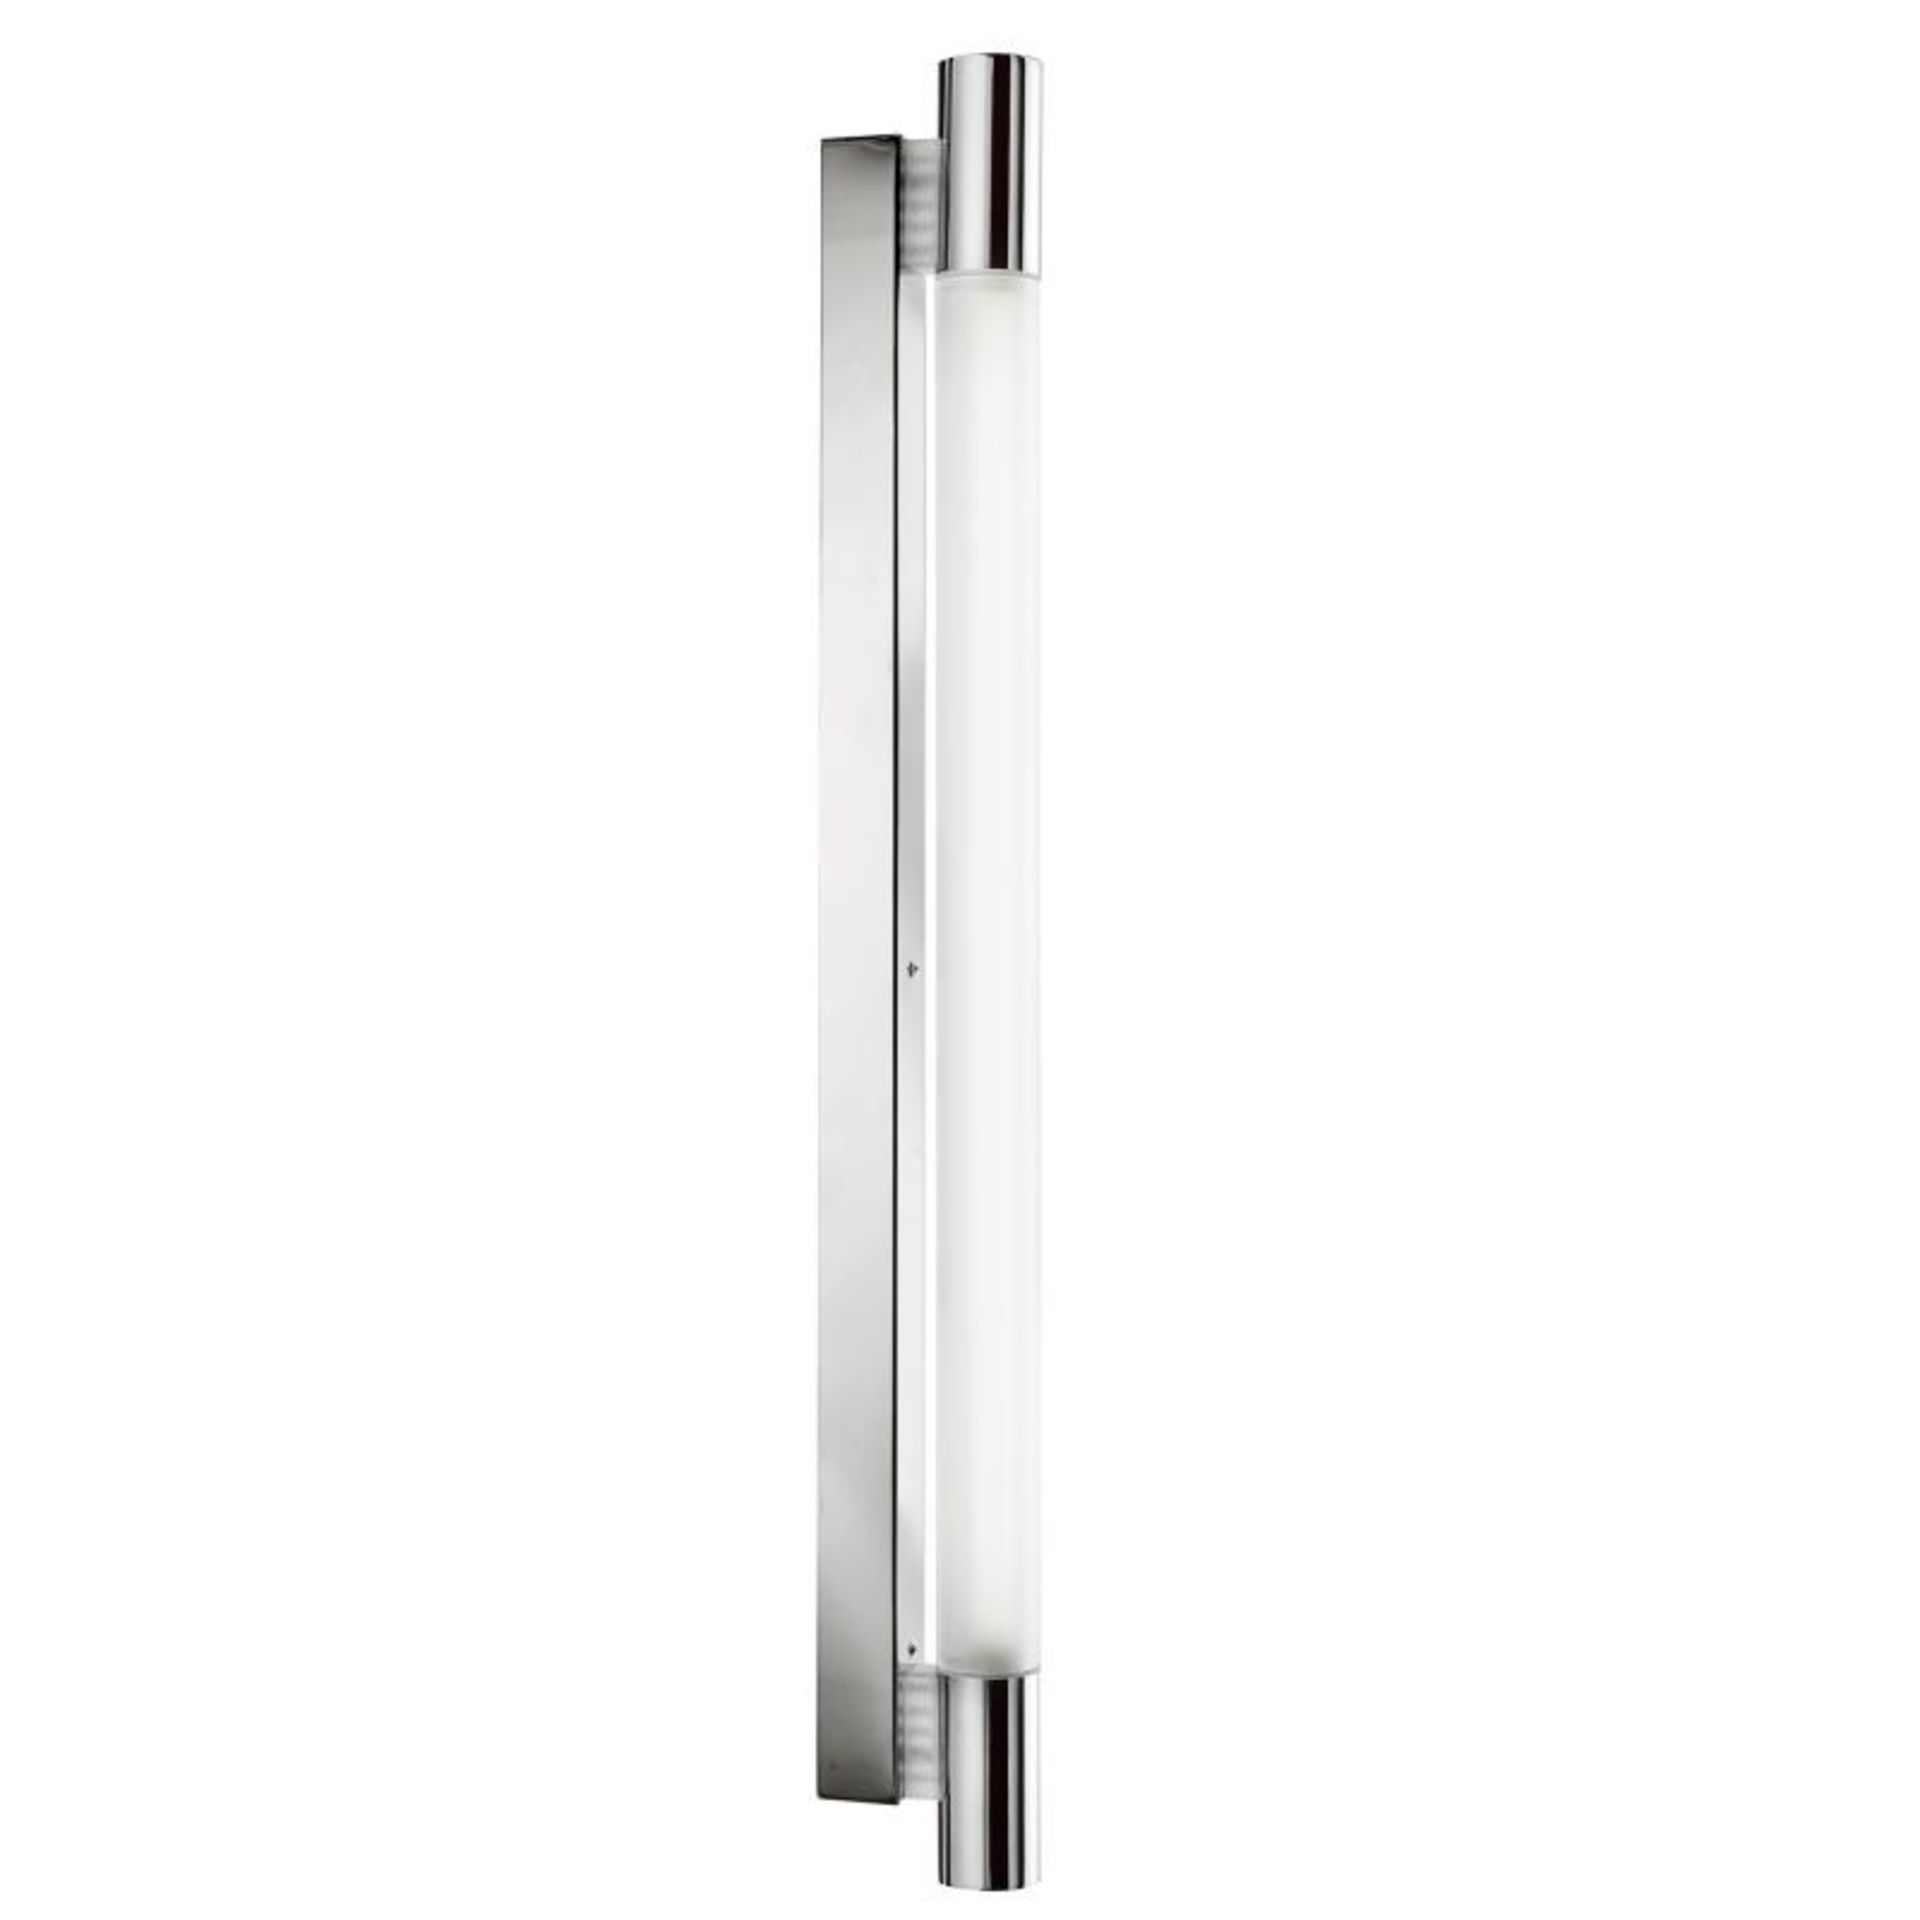 1 x Bathroom Wall Light With Chrome Finish and Frosted Glass Shade - T5 IP44 Rated - New Boxed Stock - Image 2 of 2